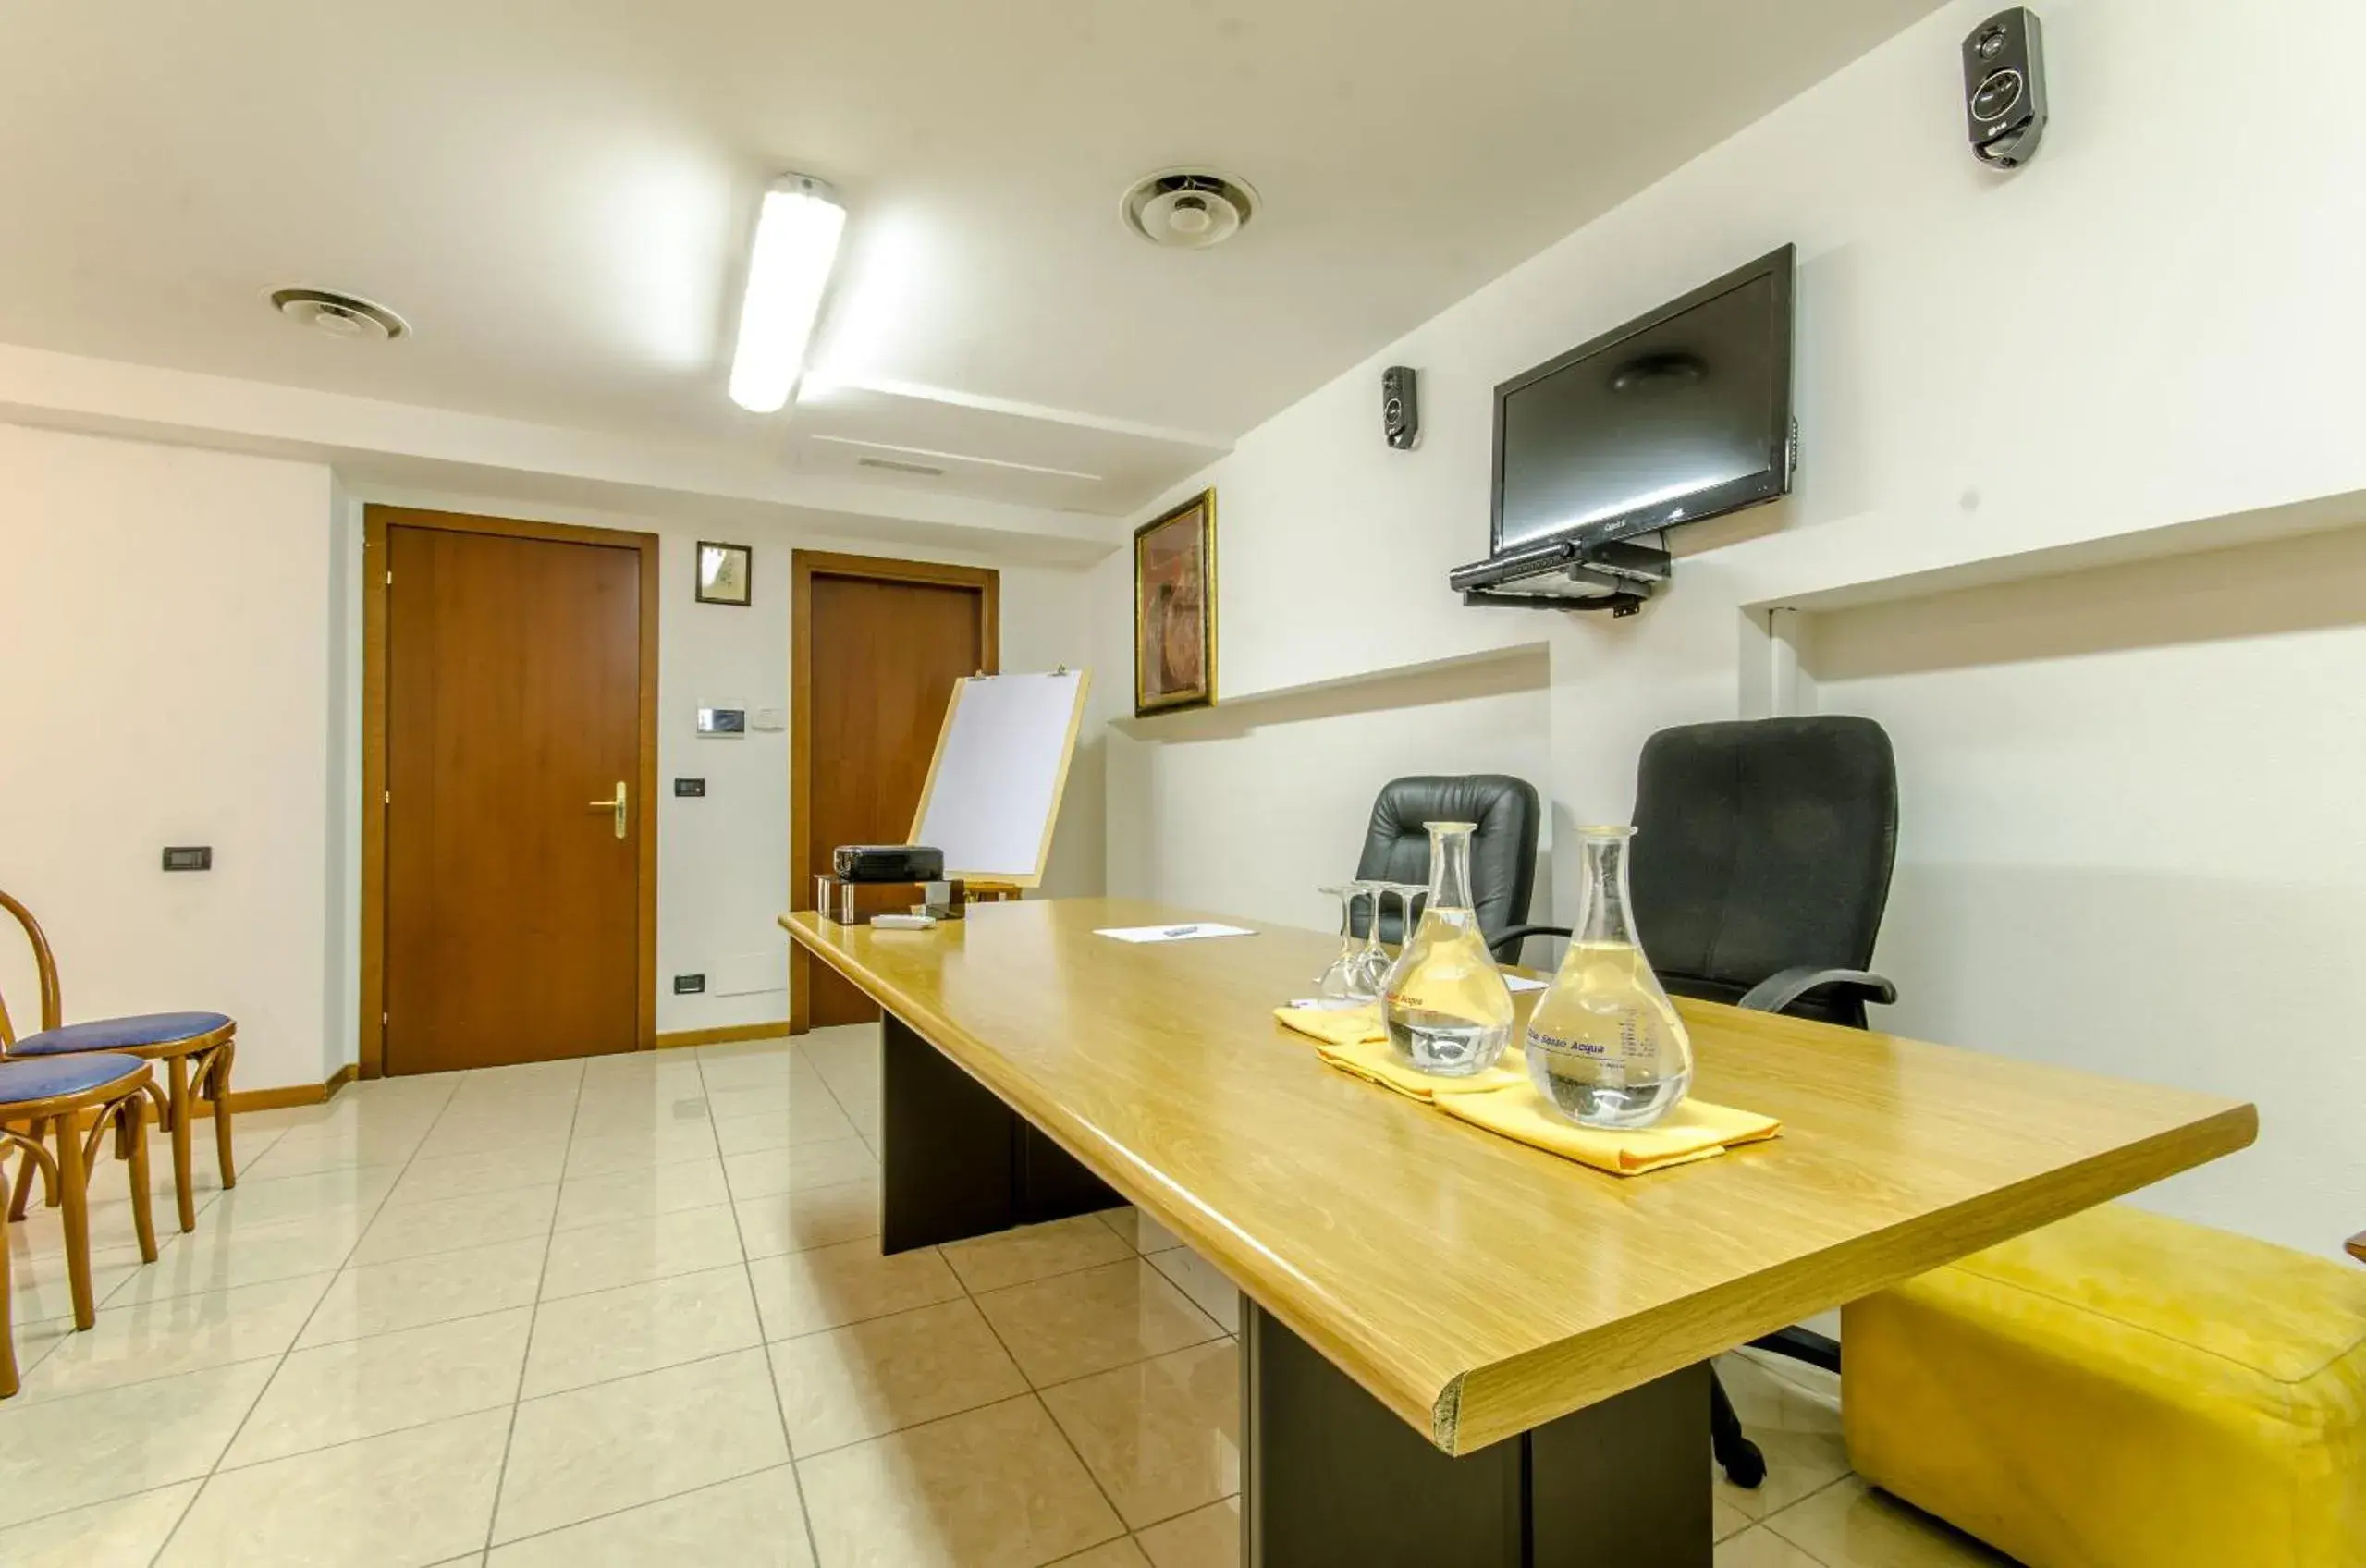 Meeting/conference room in Hotel Federico II